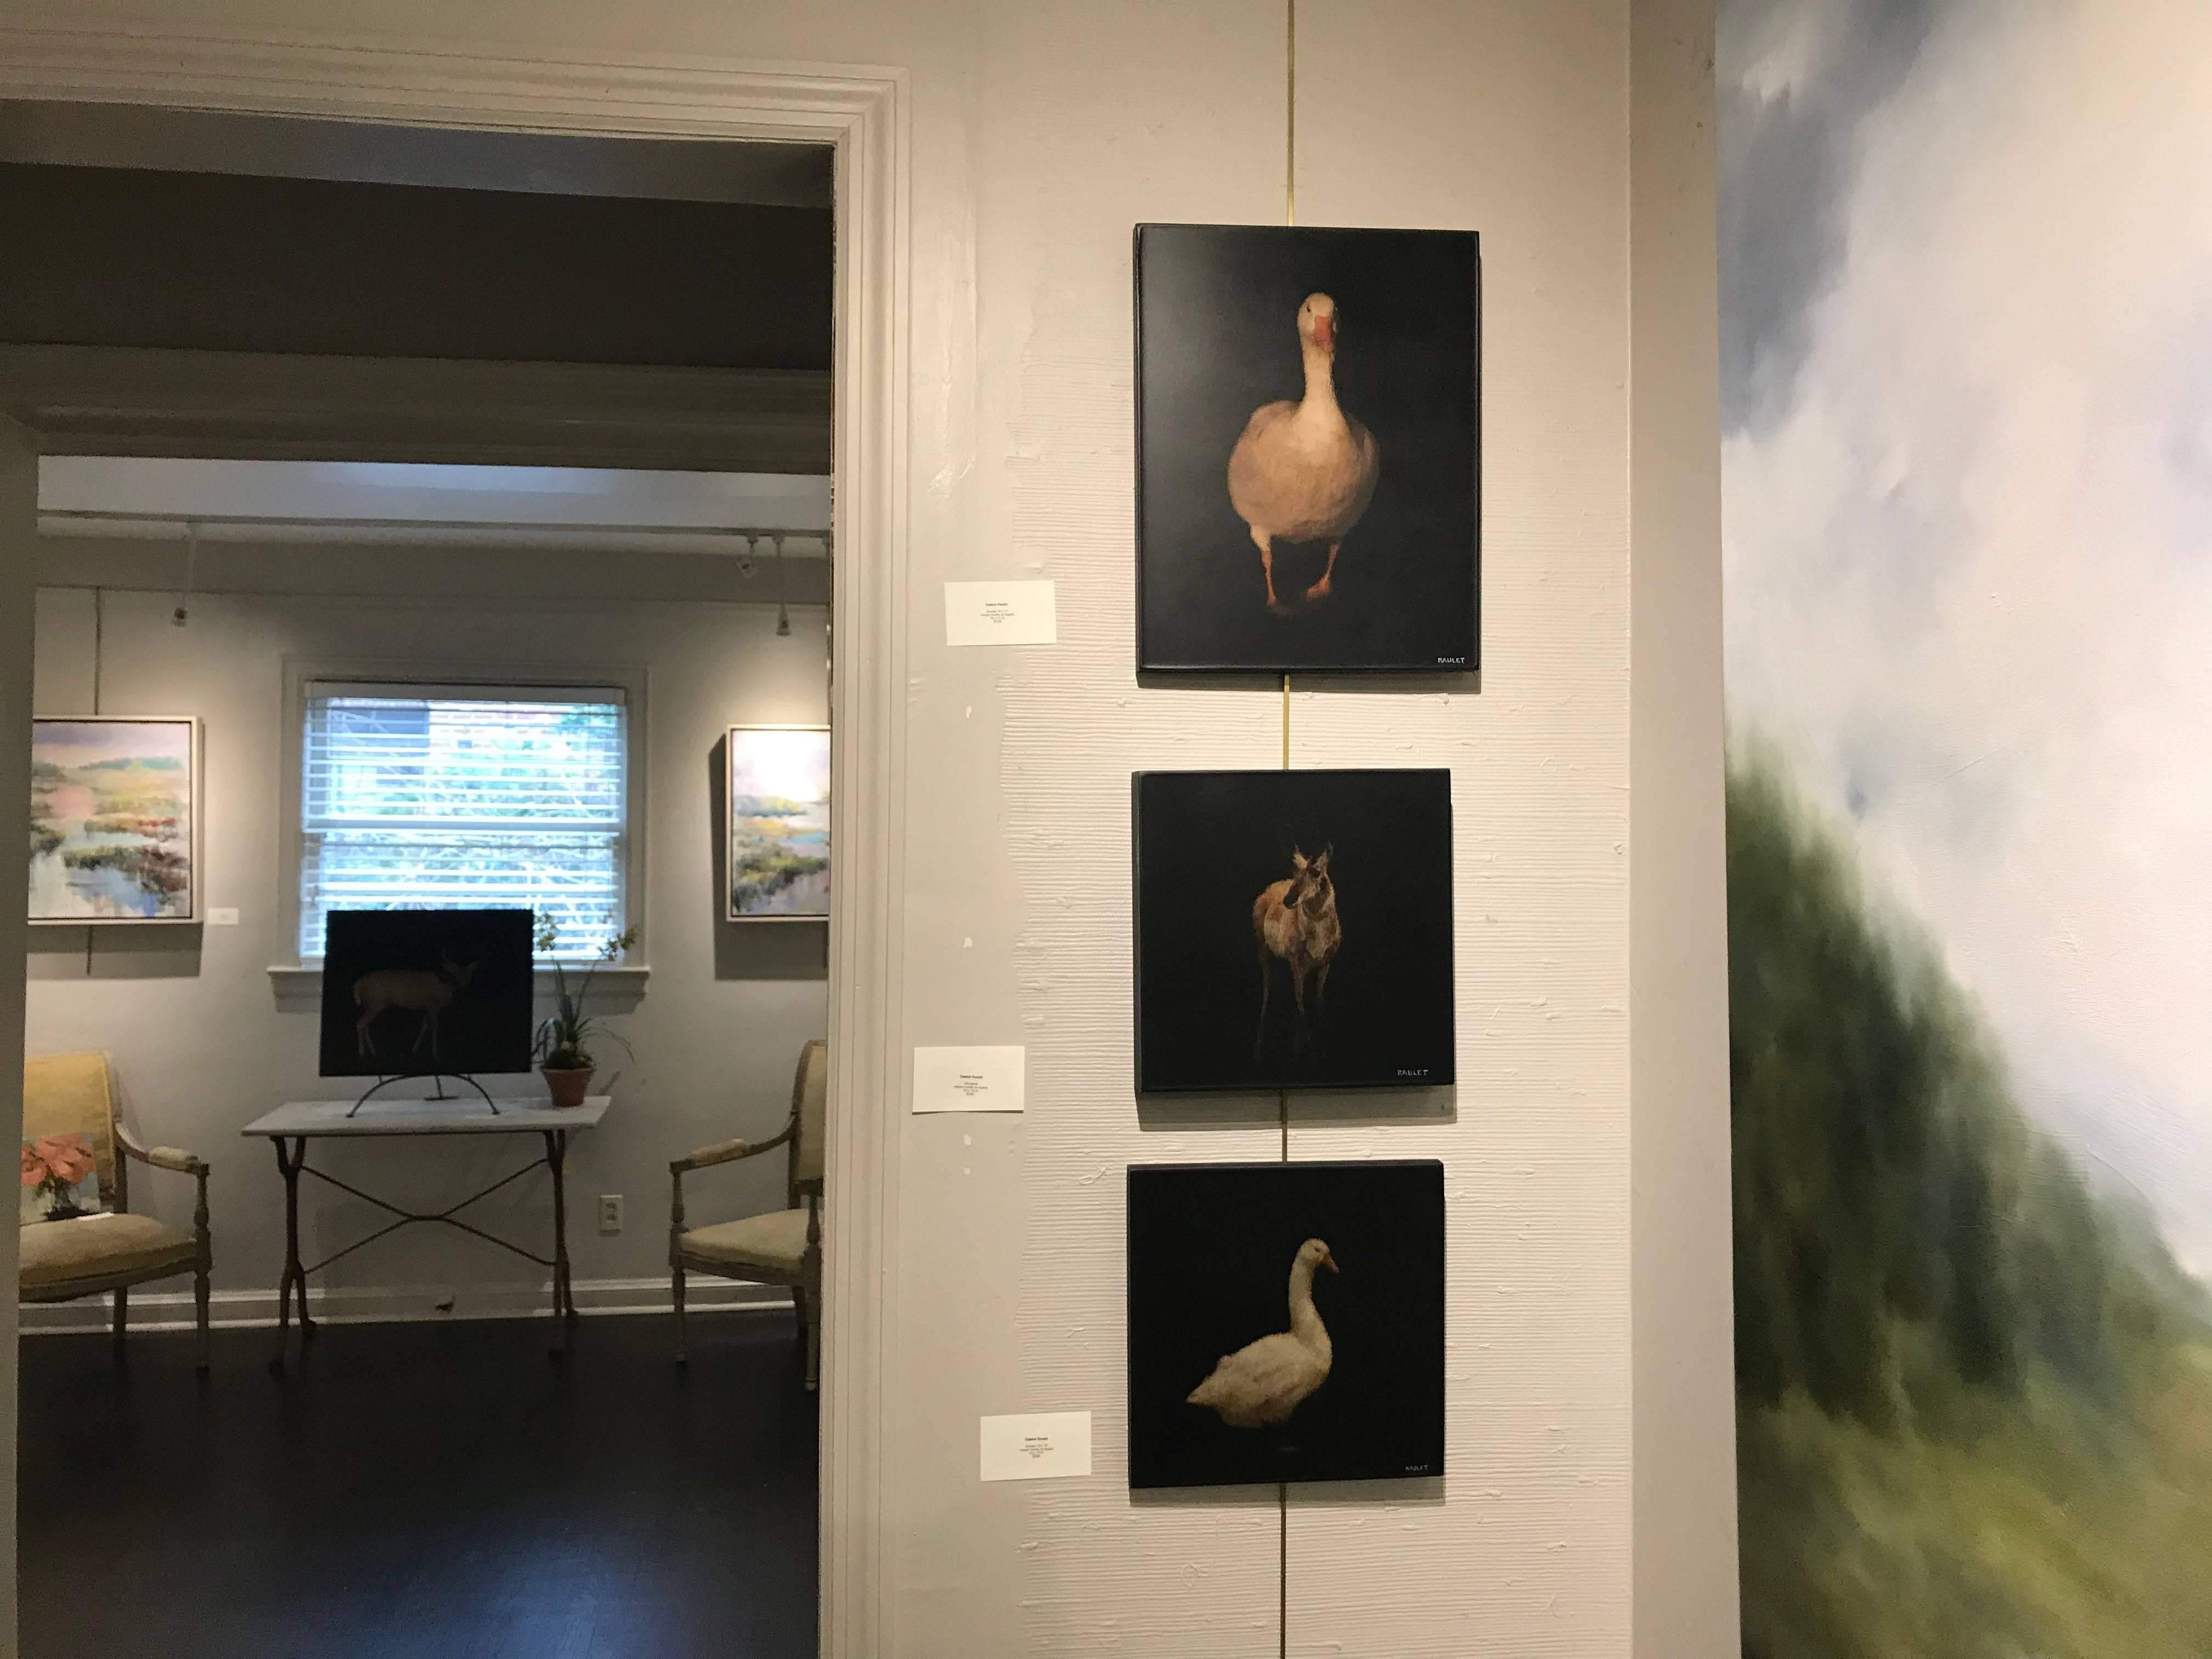 Dawne’s current body of work is made up of mixed media, wax and photography all harmonizing beautifully on the canvas and panels she paints on. She won’t tell us all her little secrets (even after we begged) but she did say that she photographs her